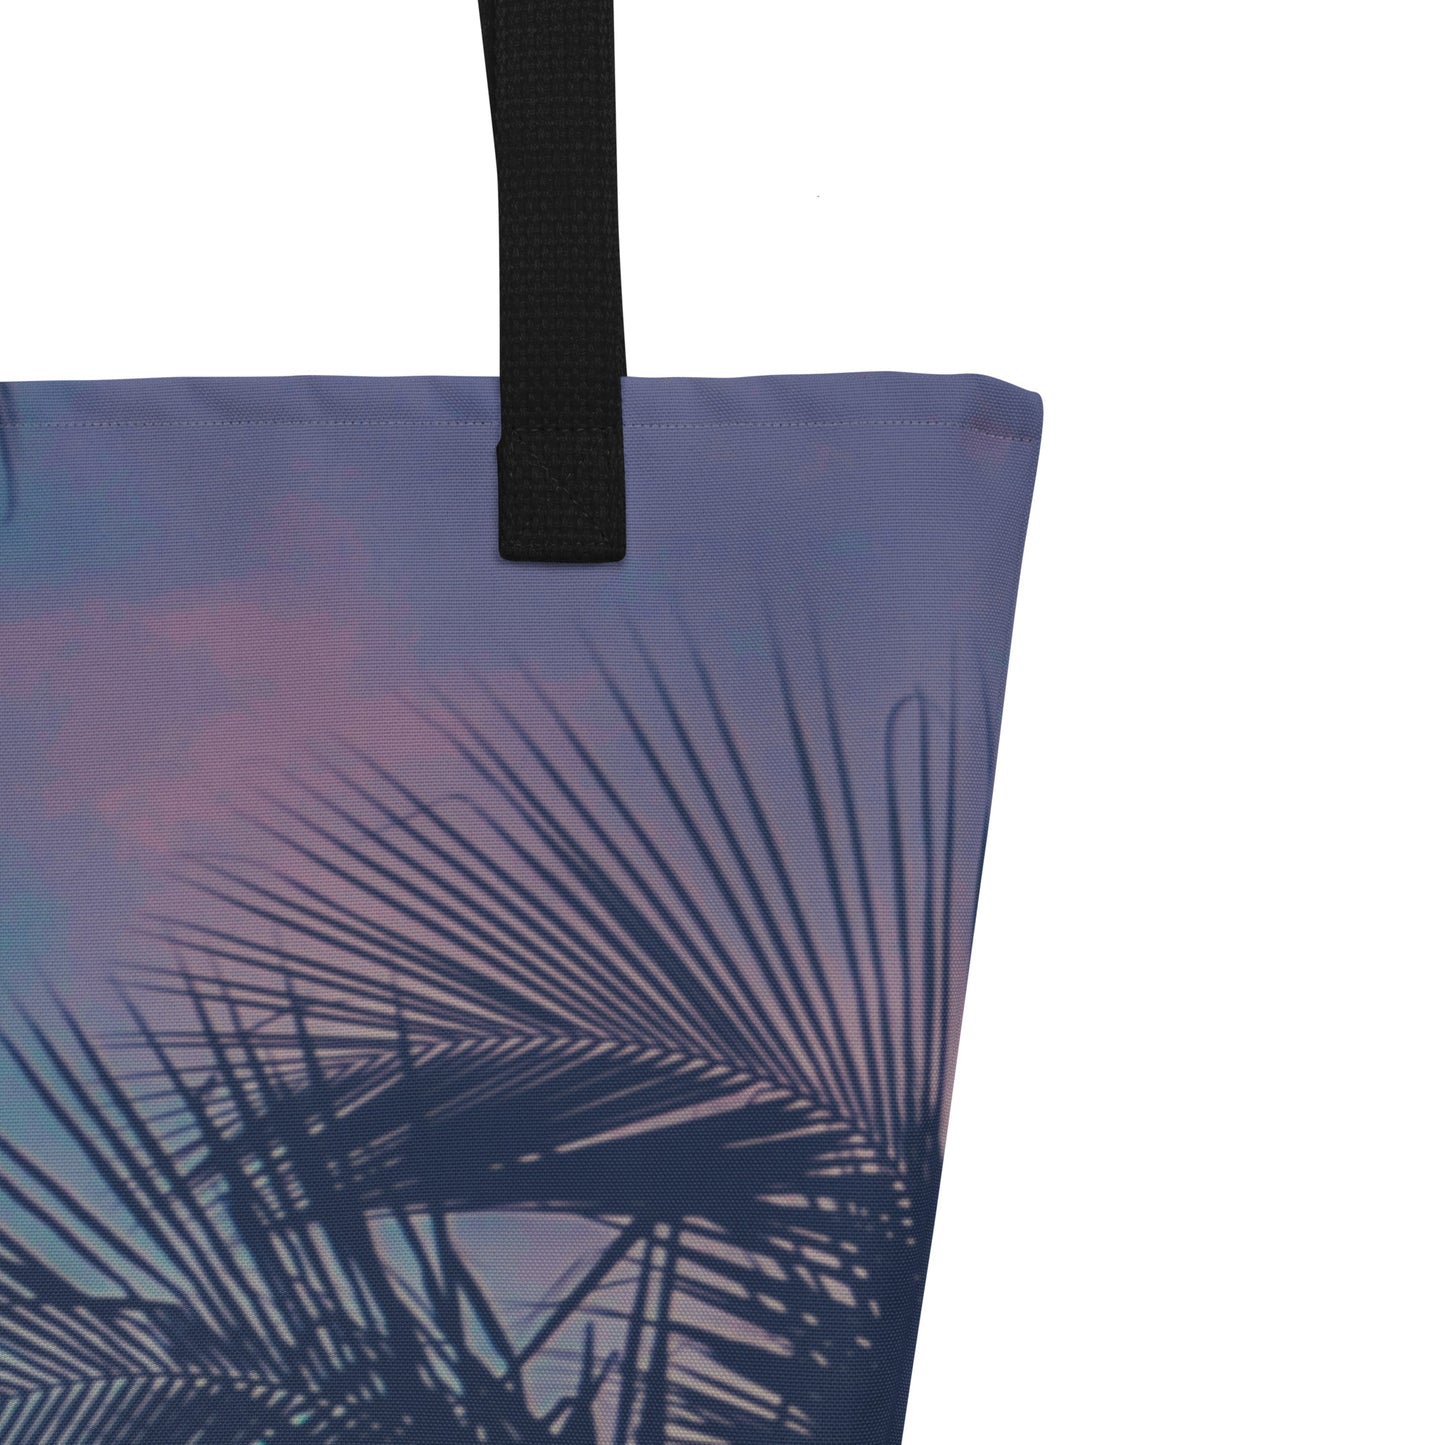 Tropical All-Over Print Large Tote Bag